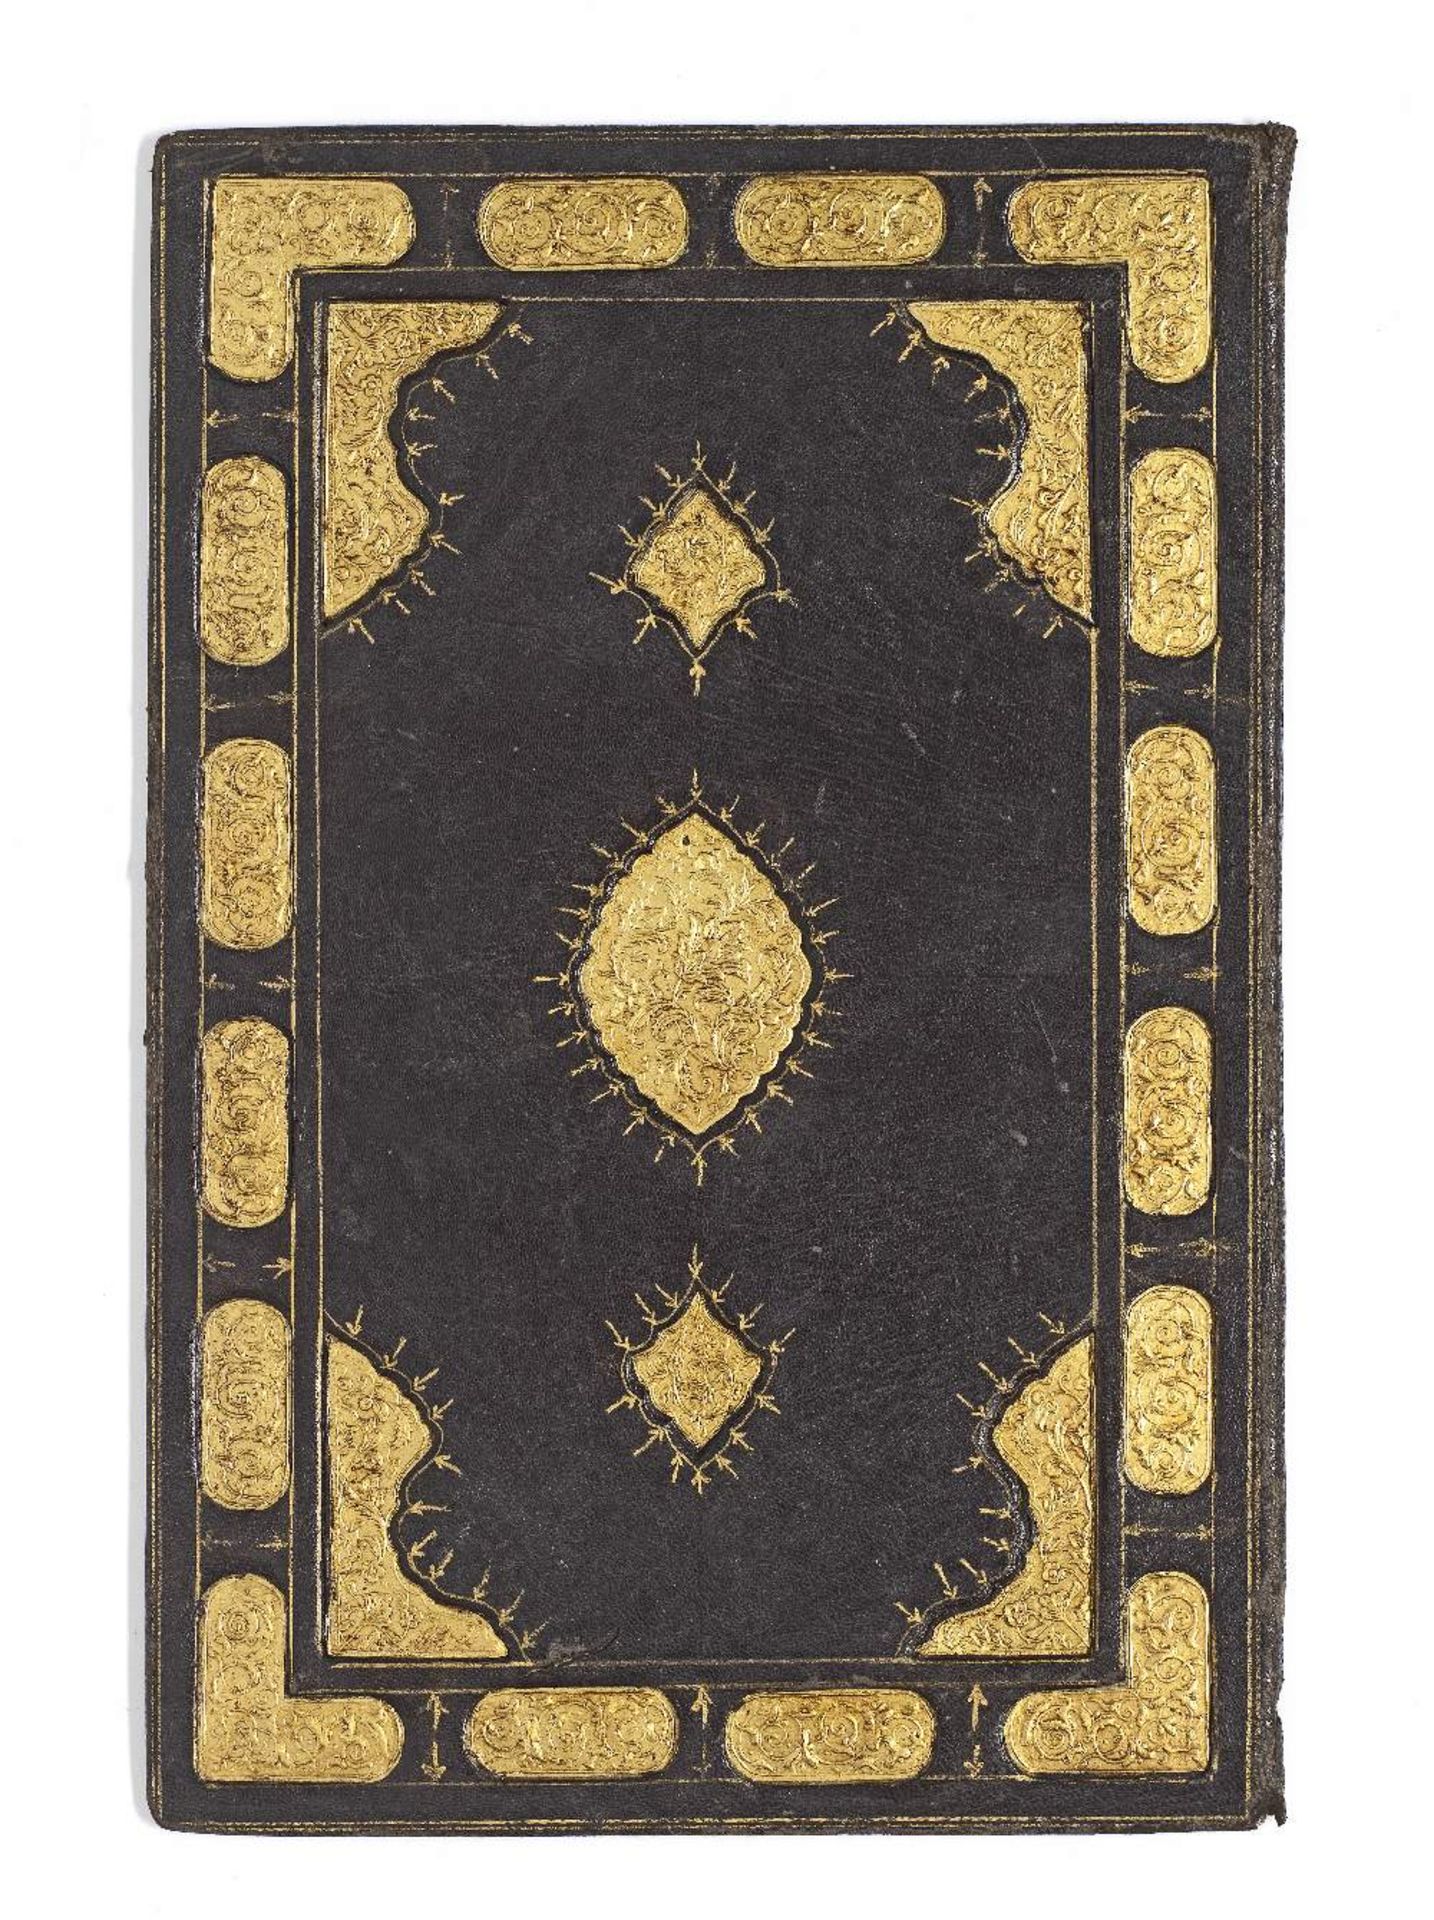 A Safavid gold-tooled bookcover Persia, 16th Century(2)